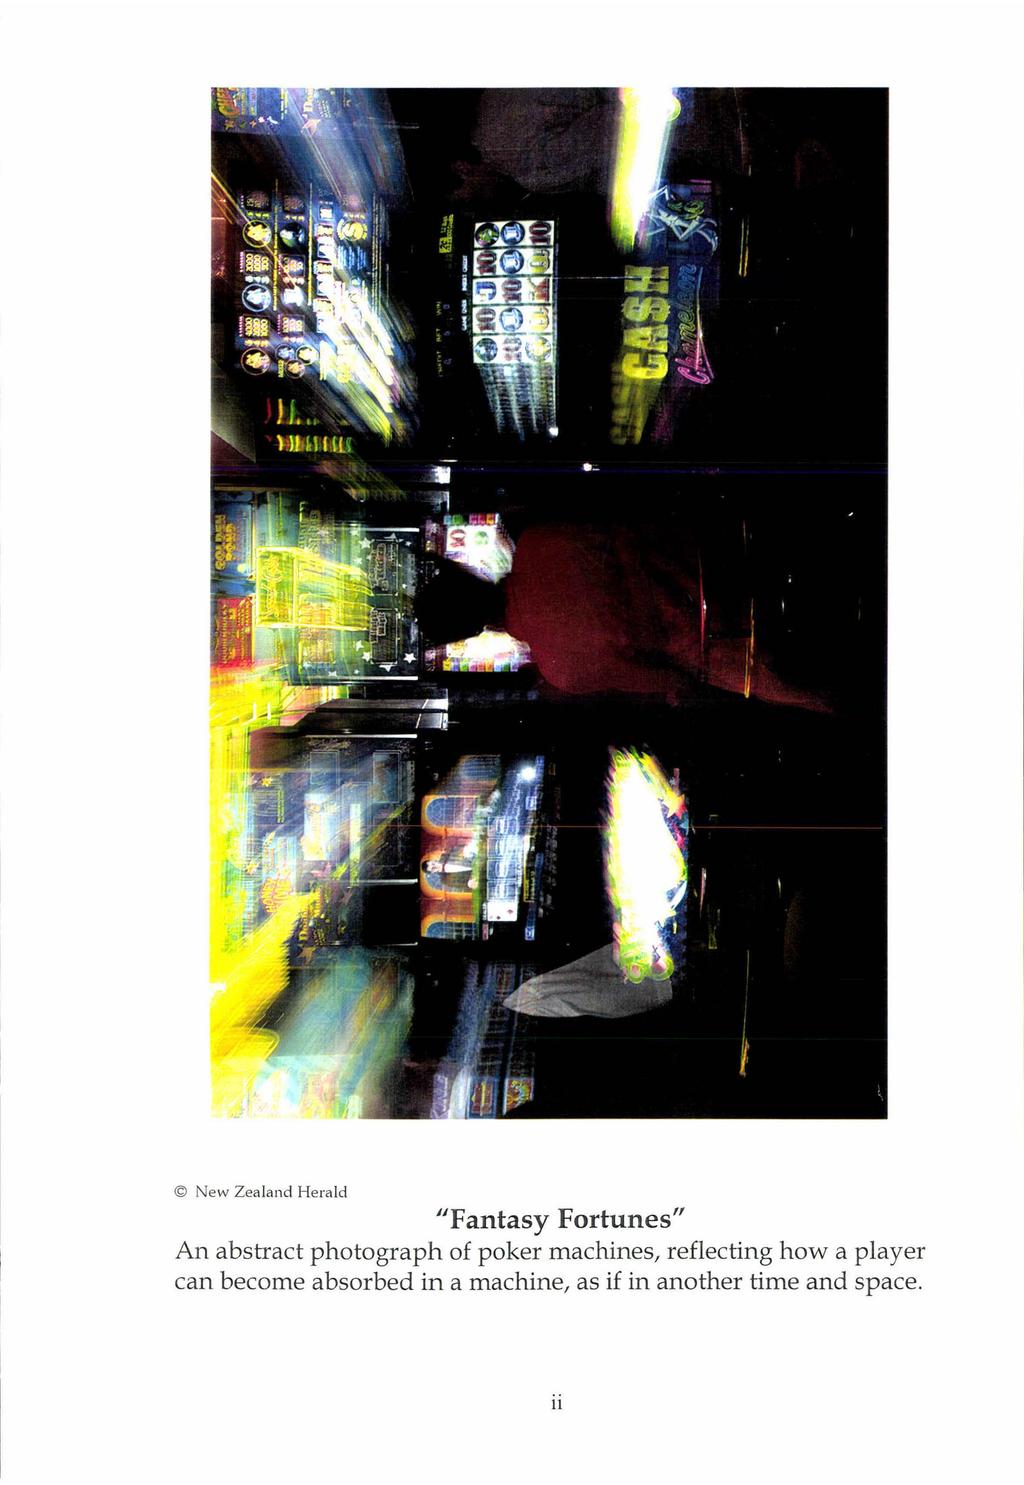 New Zealand Herald "Fantasy Fortunes" An abstract photograph of poker machines,